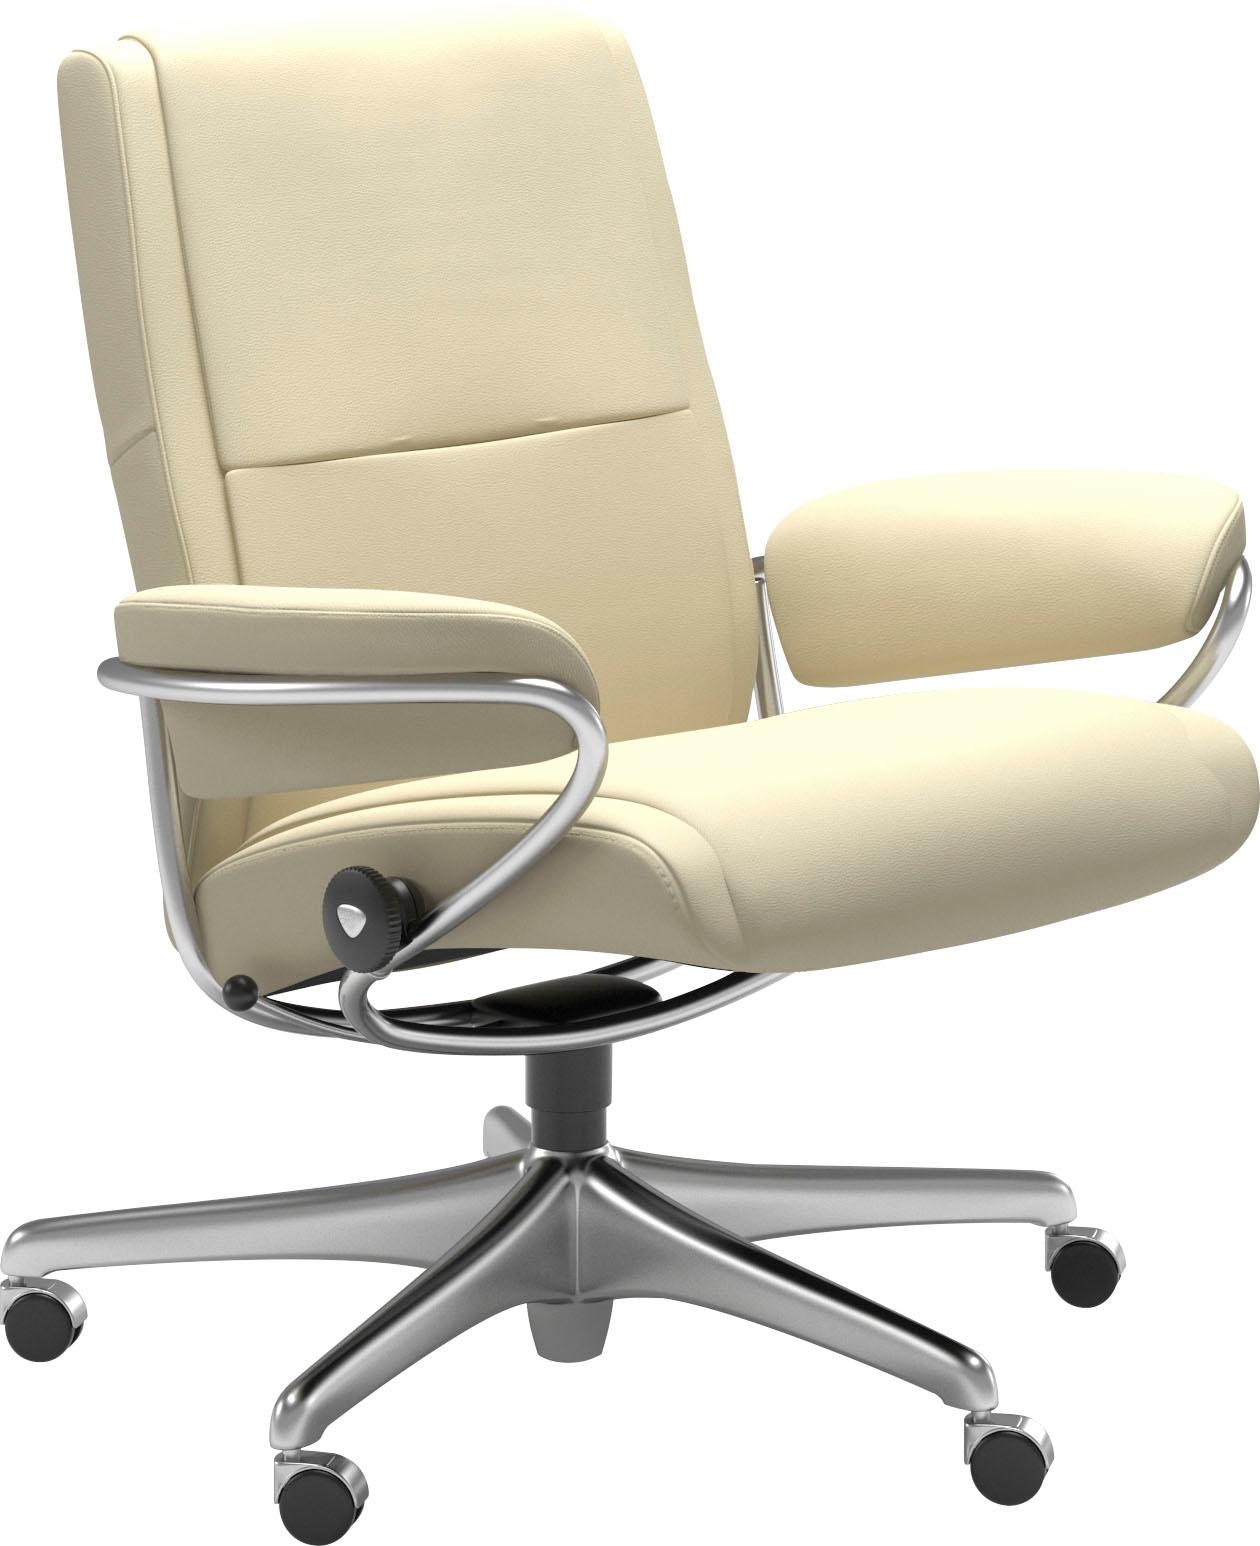 Stressless® BAUR Gestell Back, | mit Low Relaxsessel kaufen »Paris«, Chrom Base, Office Home